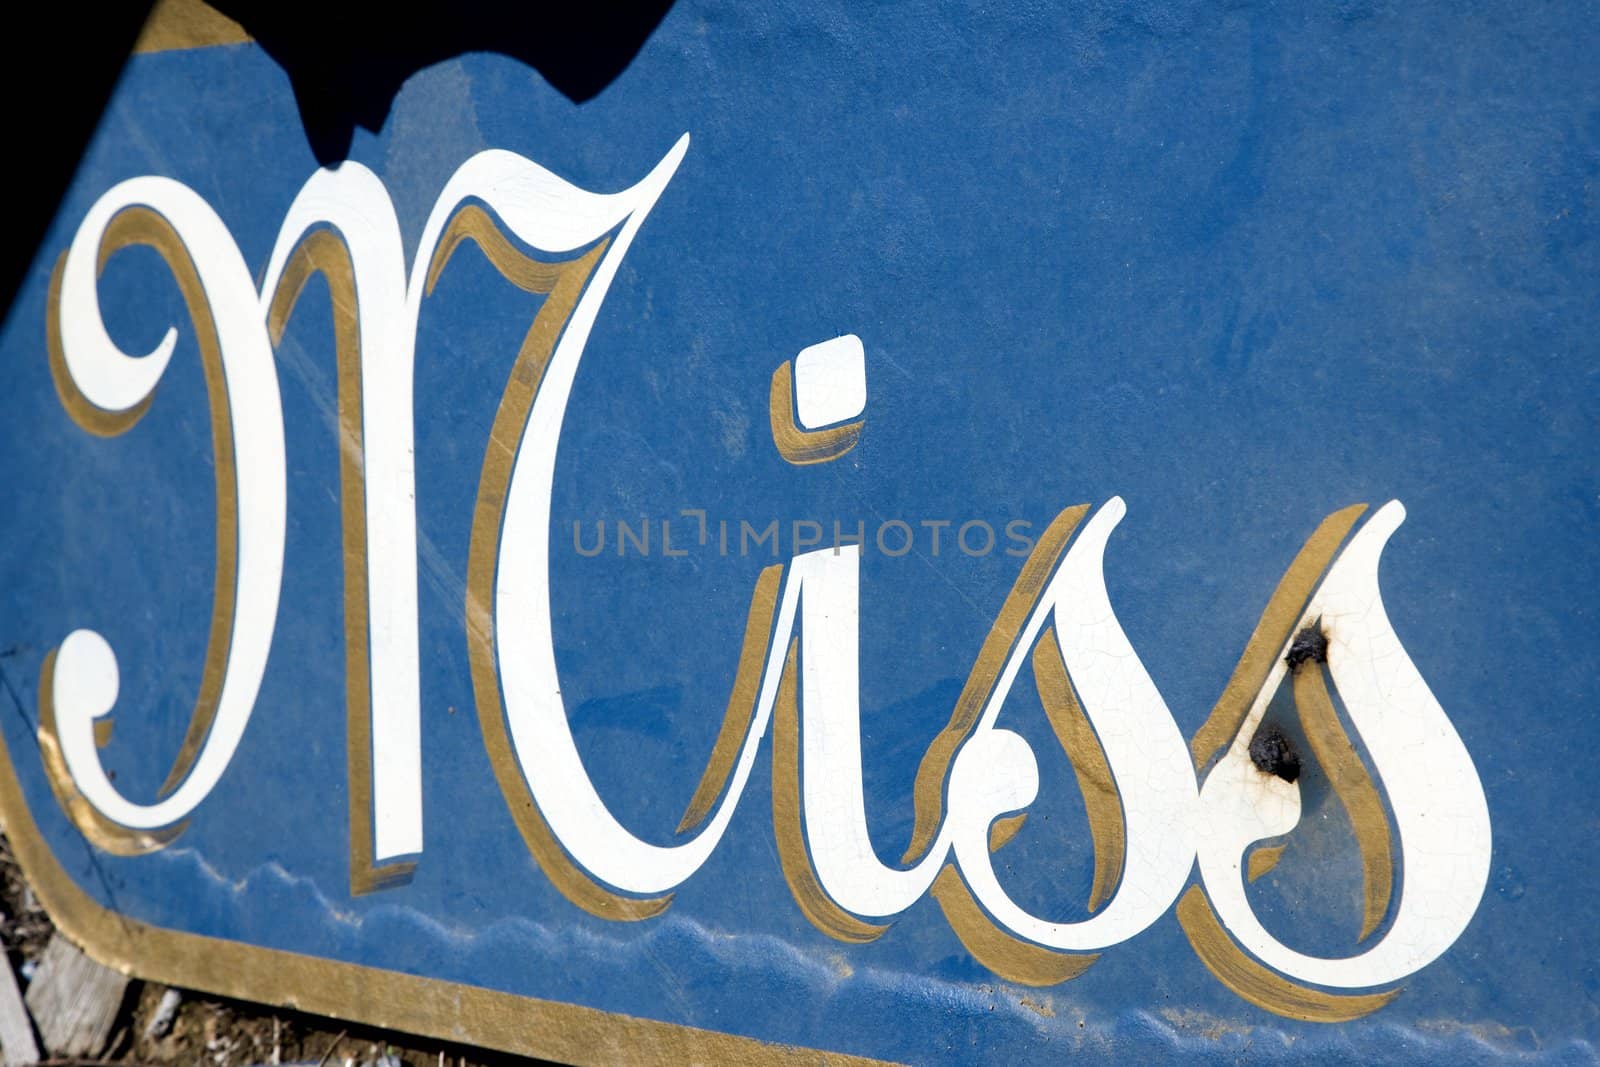 Blue sign with the word "Miss" in cursive written on it.